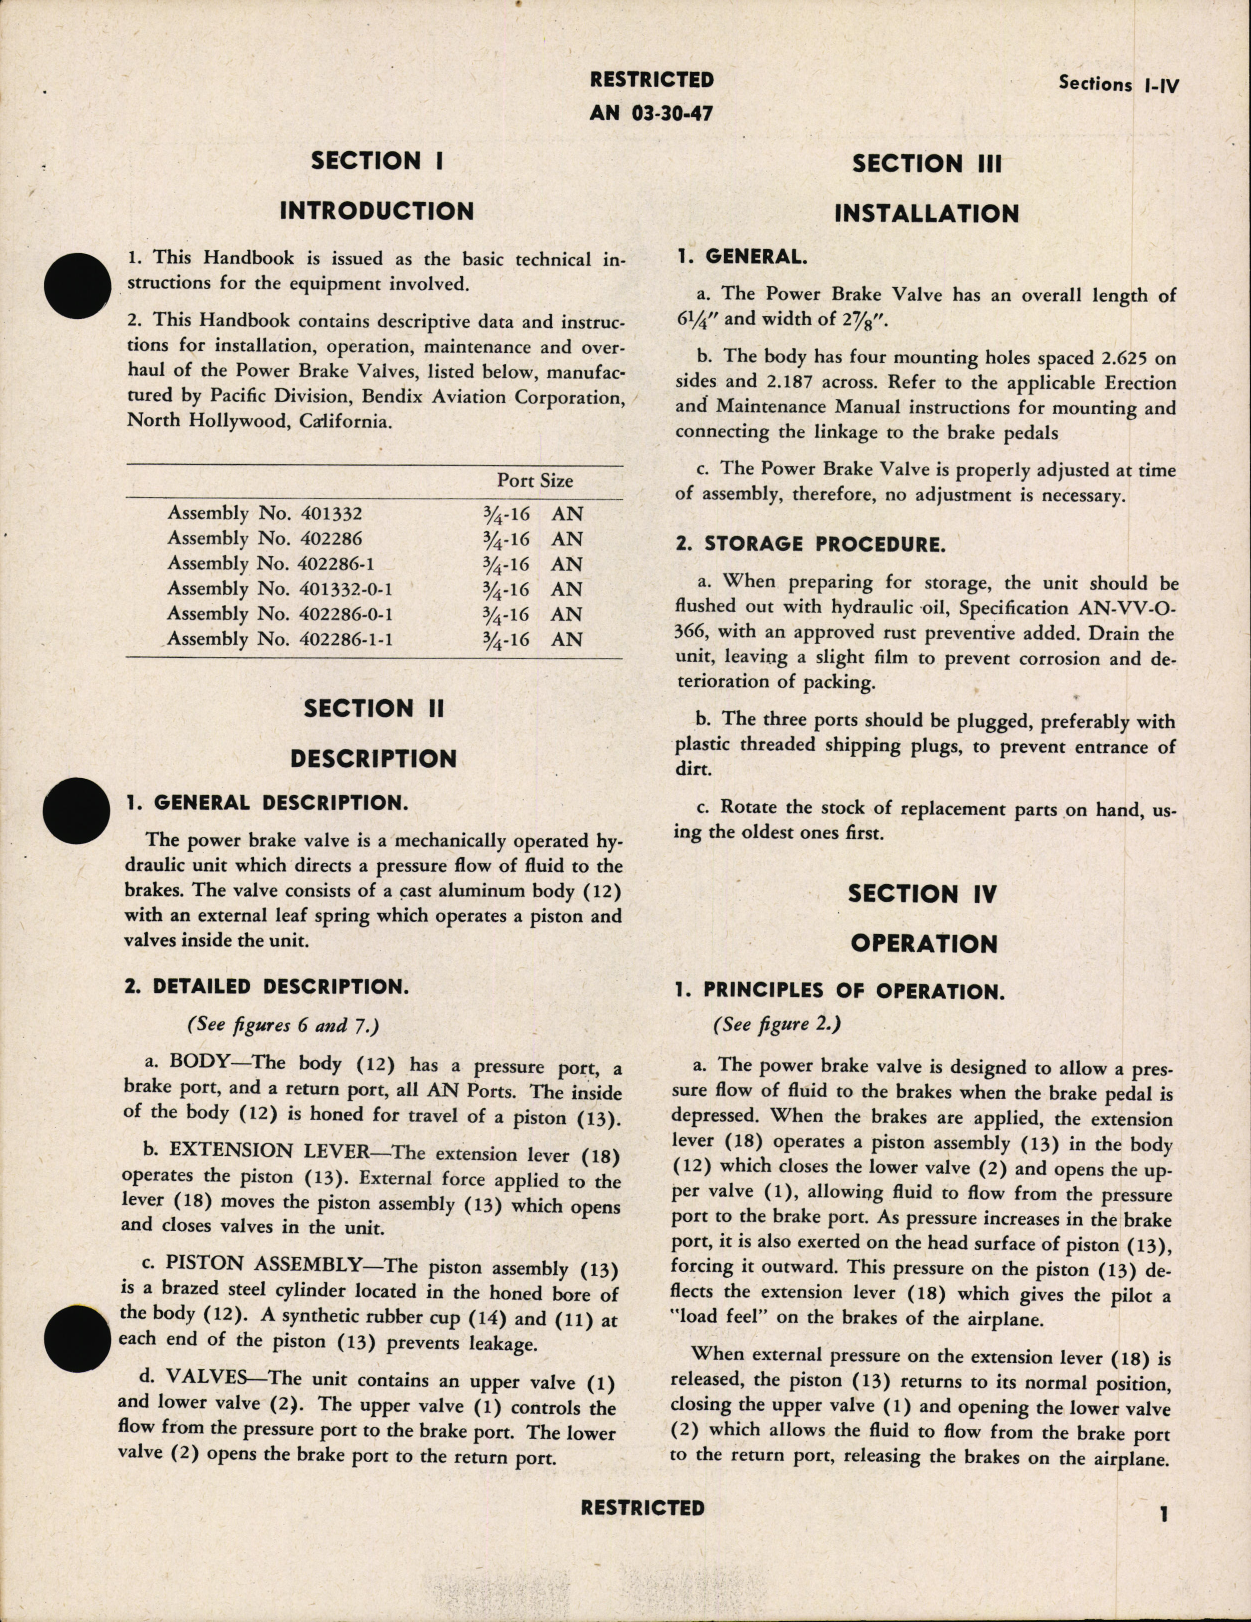 Sample page 5 from AirCorps Library document: Handbook Of Instructions With Parts Catalog for Power Brake Valves